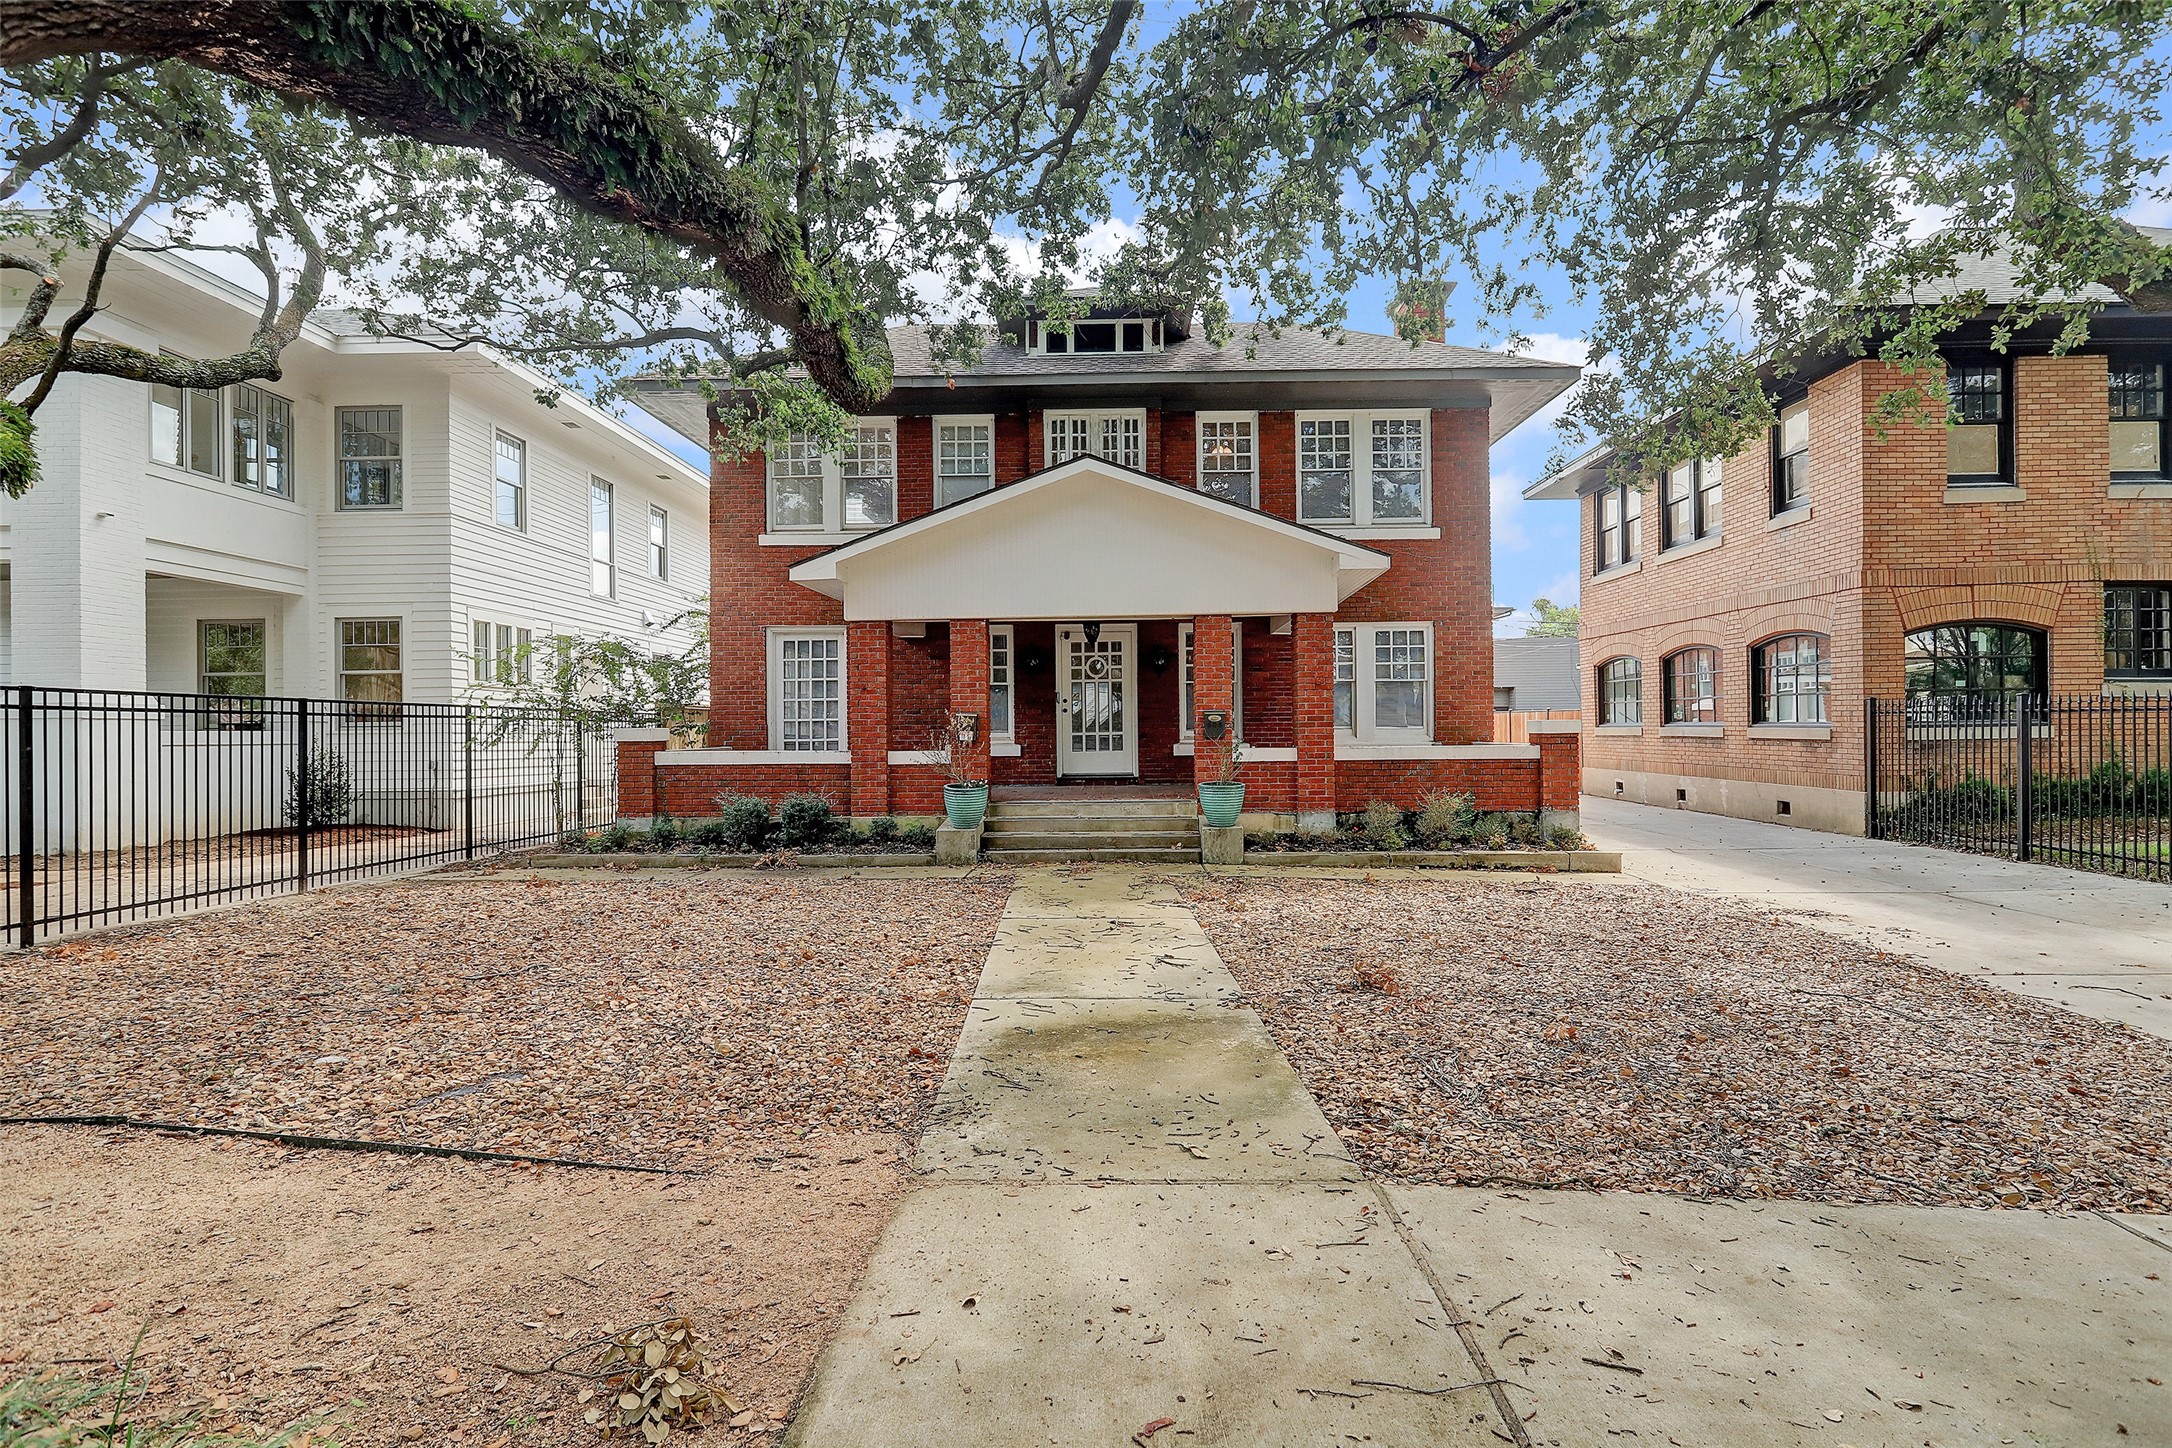 Welcome home to 606 Avondale! This stunning historic home is located in the heart of Montrose!